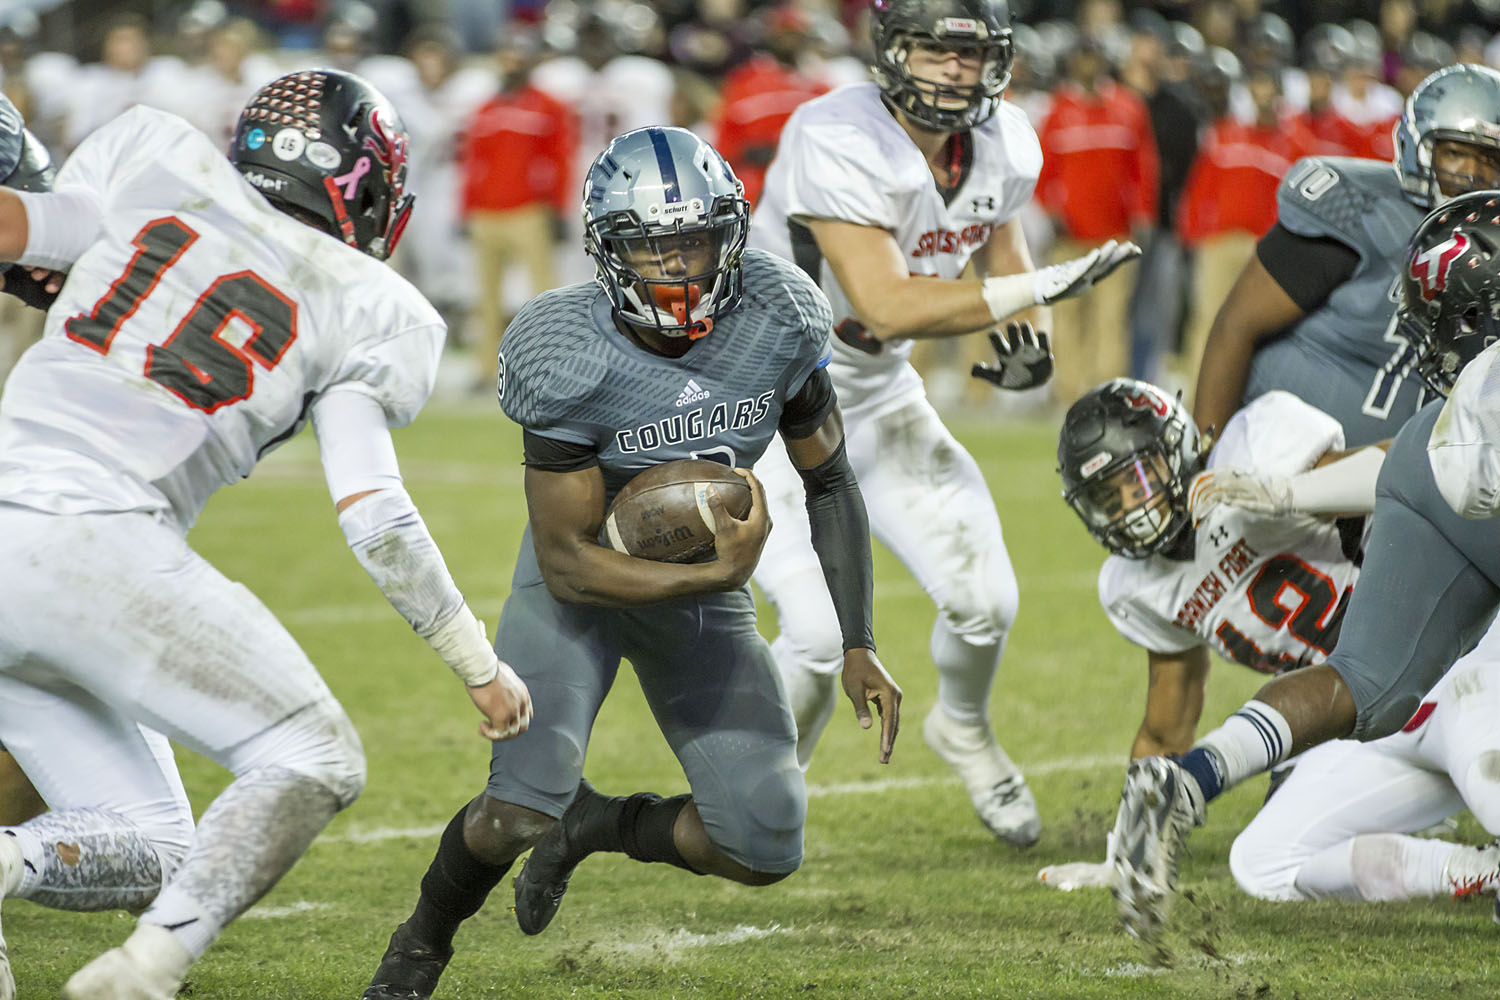 Clay-Chalkville quarterback grabs another offer 